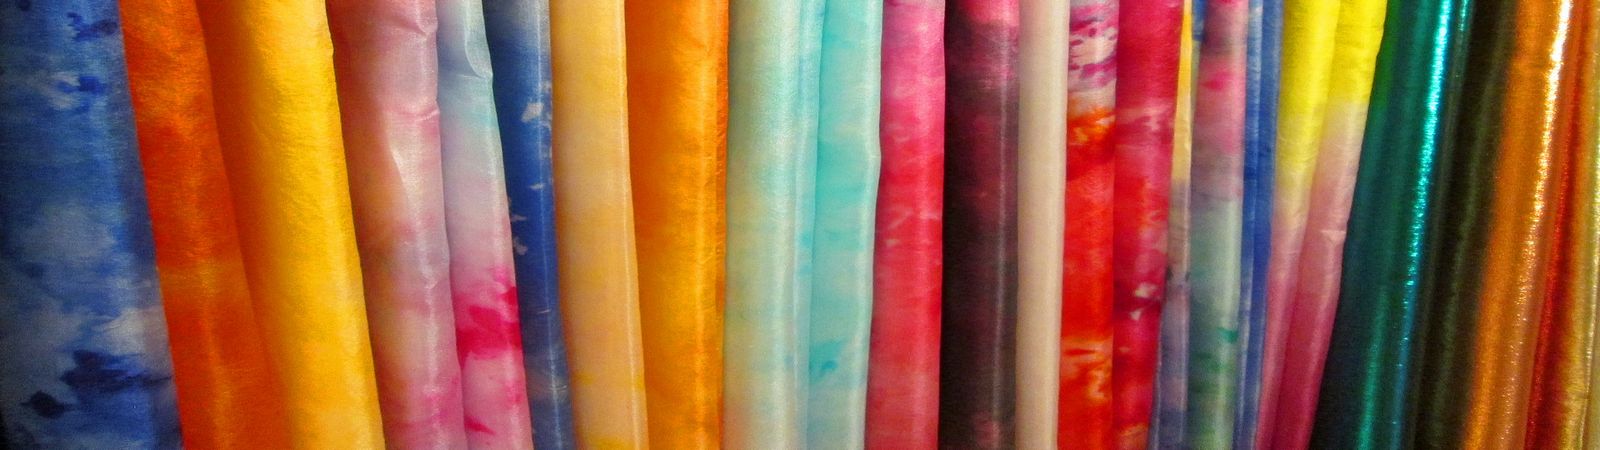 SILKS Prophetically hand-dyed - Dance Veils or Flags